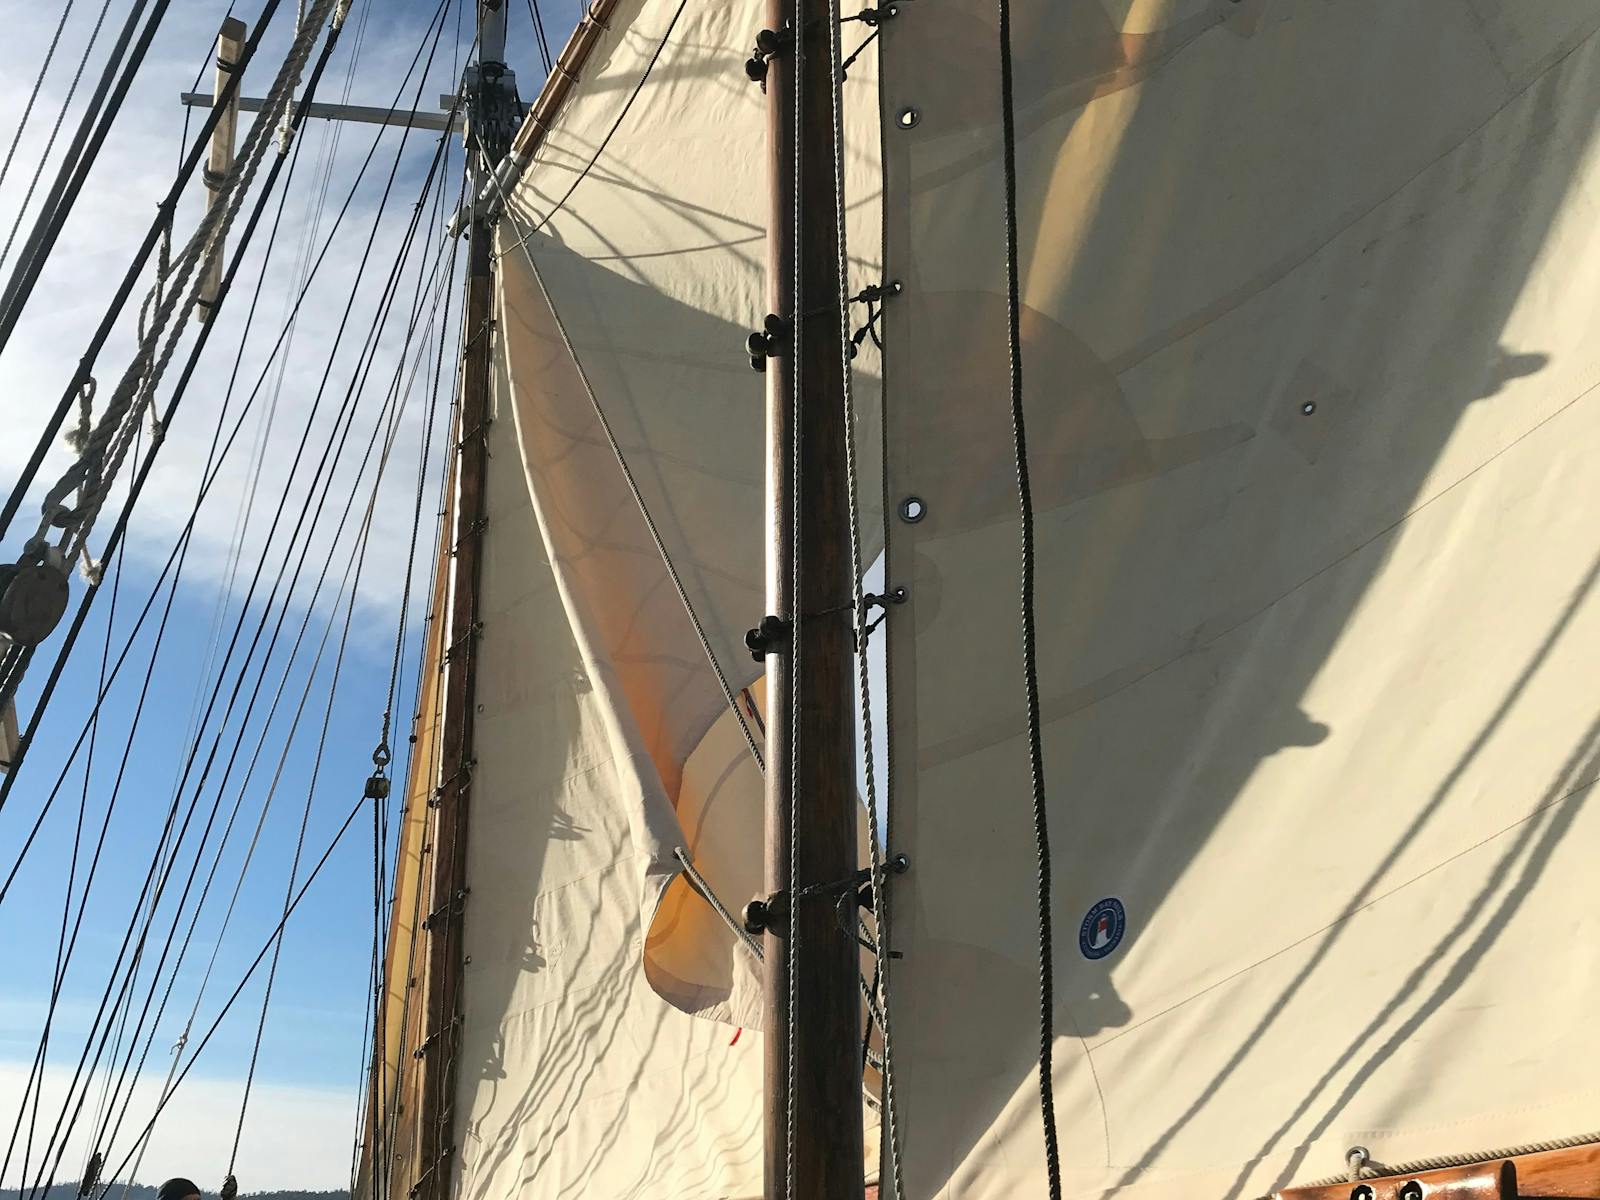 Traditional Sails